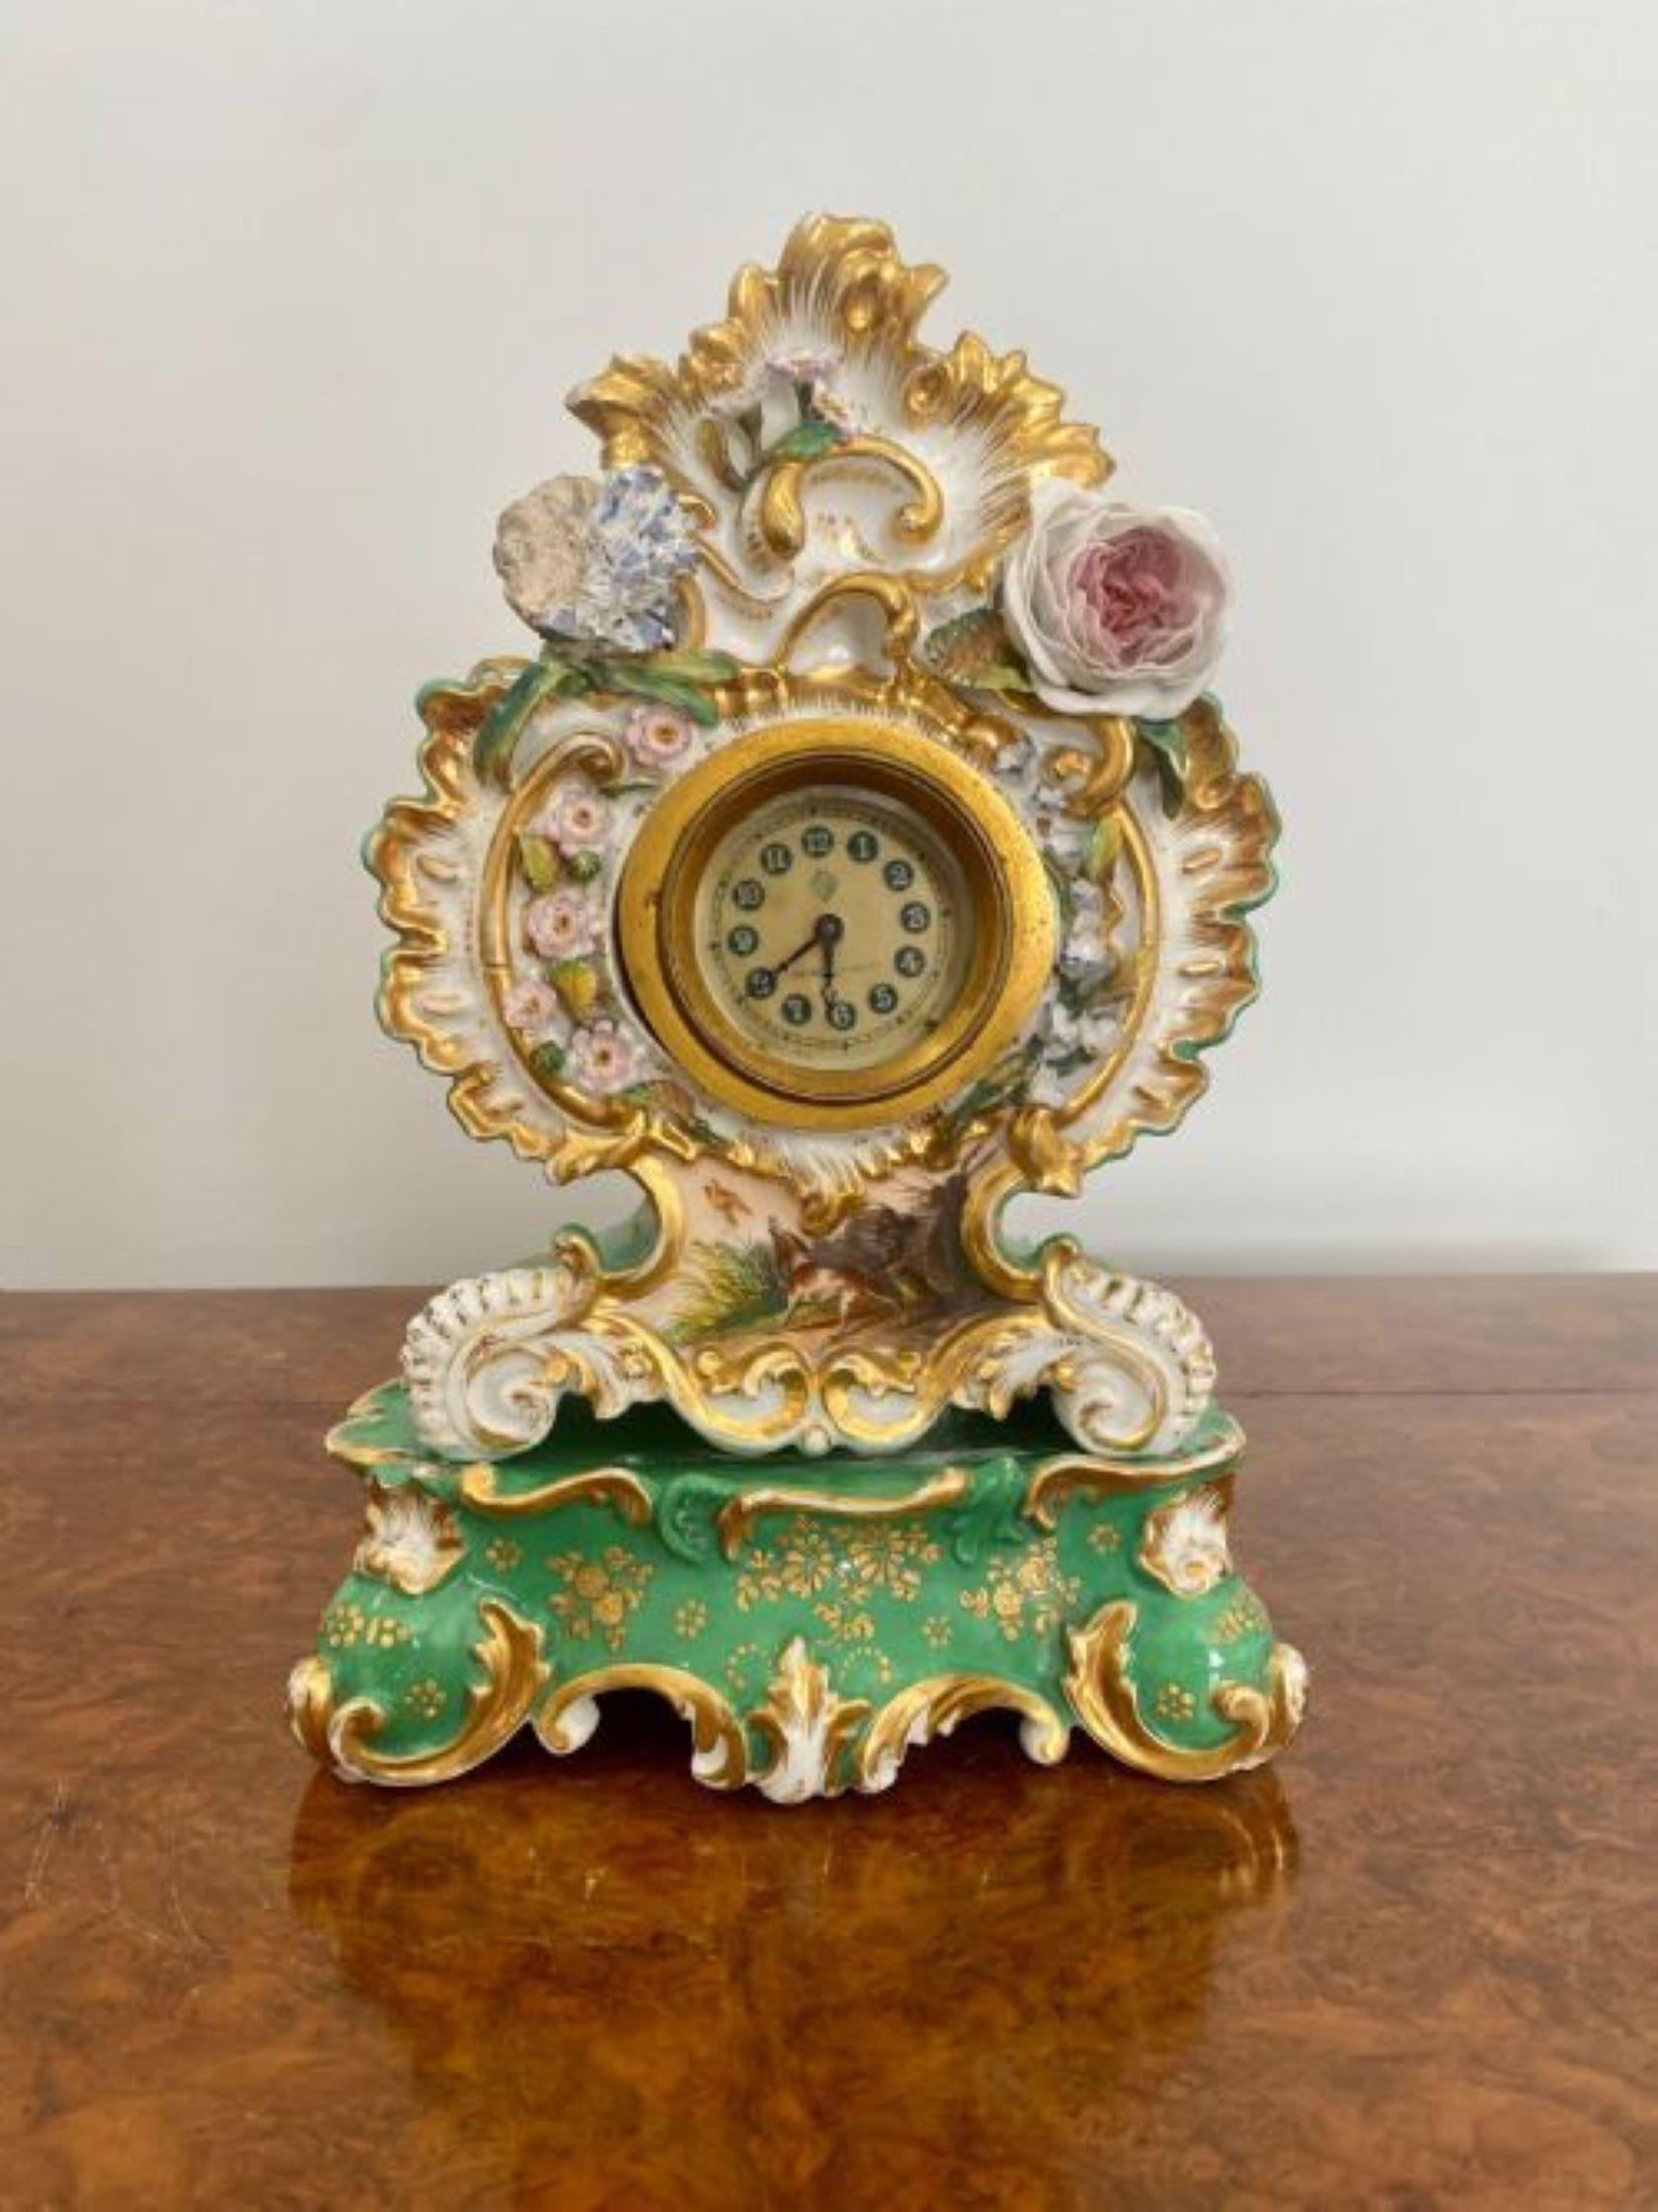 Antique Edwardian quality hand painted porcelain mantle clock having a quality hand painted decorated porcelain clock case with flowers, leaves and scrolls in wonderful green, yellow, pink, blue, white and gold colours movement by the British United